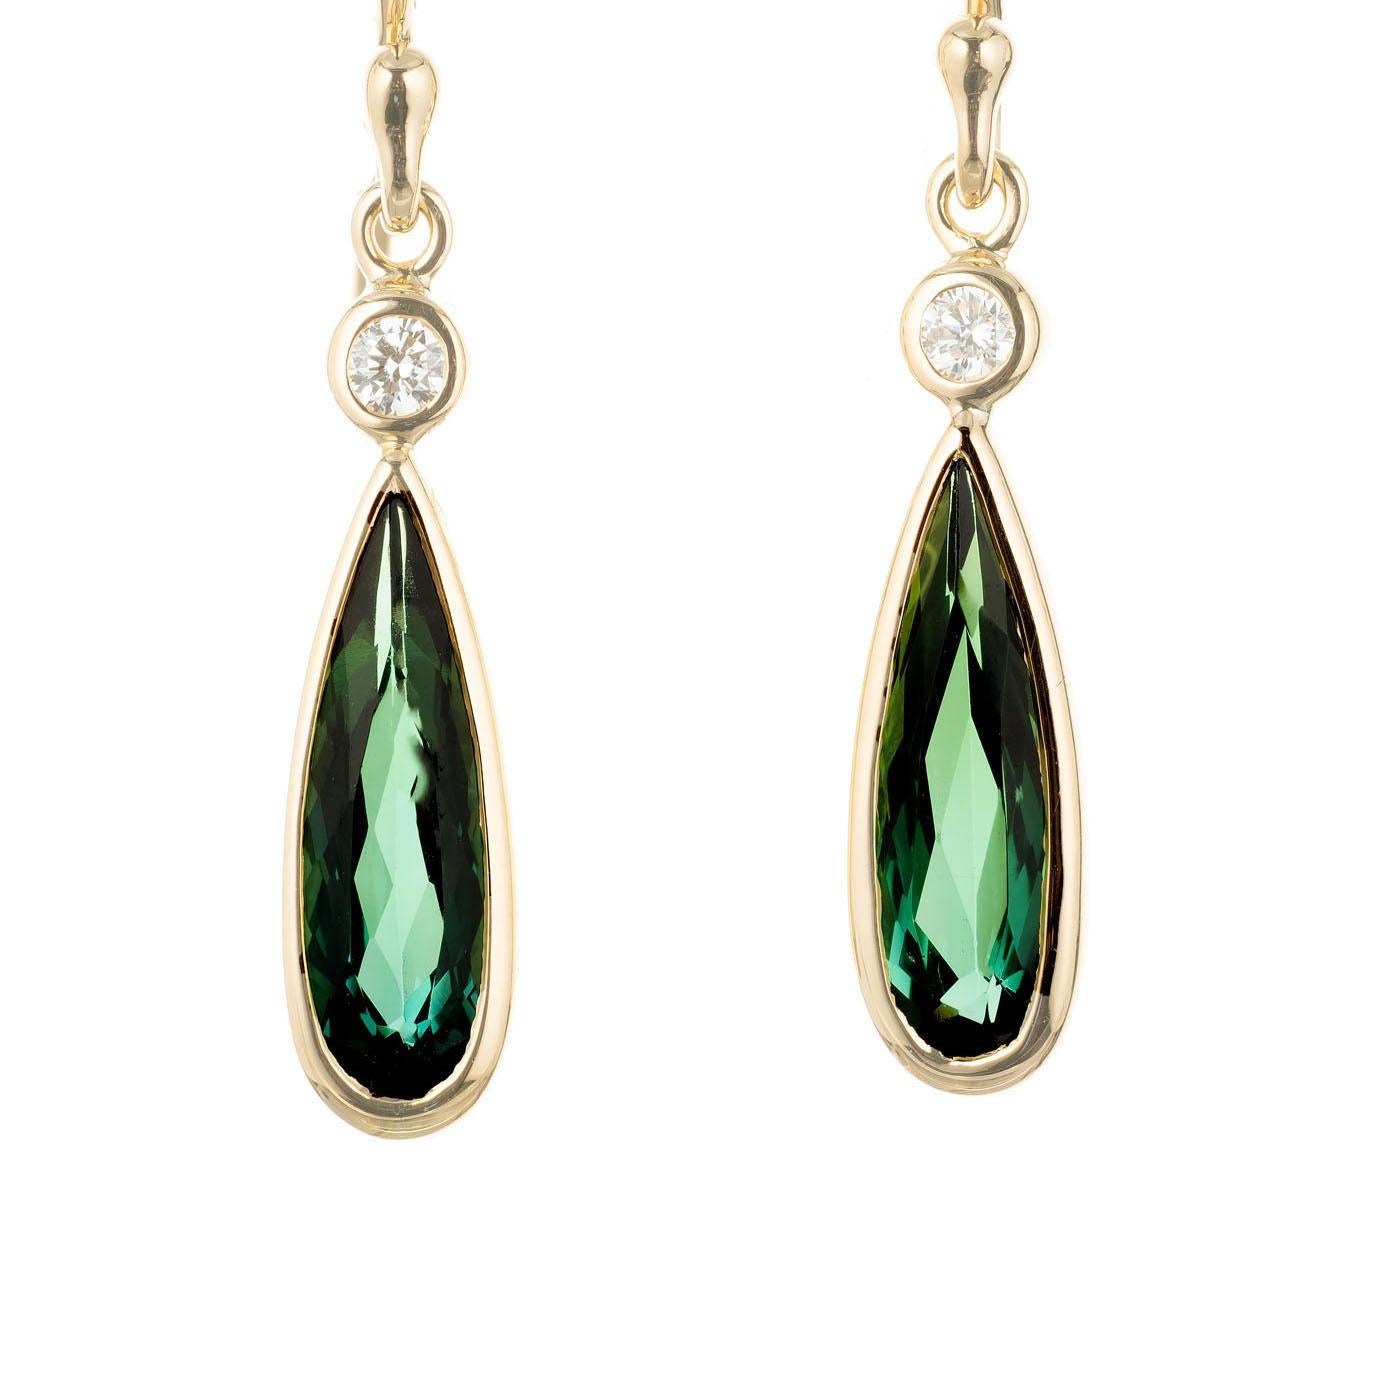 Green pear shaped tourmaline and round diamond dangle earrings. Handmade bezel in 18k  yellow gold. Made in the Peter Suchy Workshop

2 pear shape bluish green tourmaline, approx.  1.40cts
2 round brilliant cut diamonds G-H VS, approx.  .8ct
18k